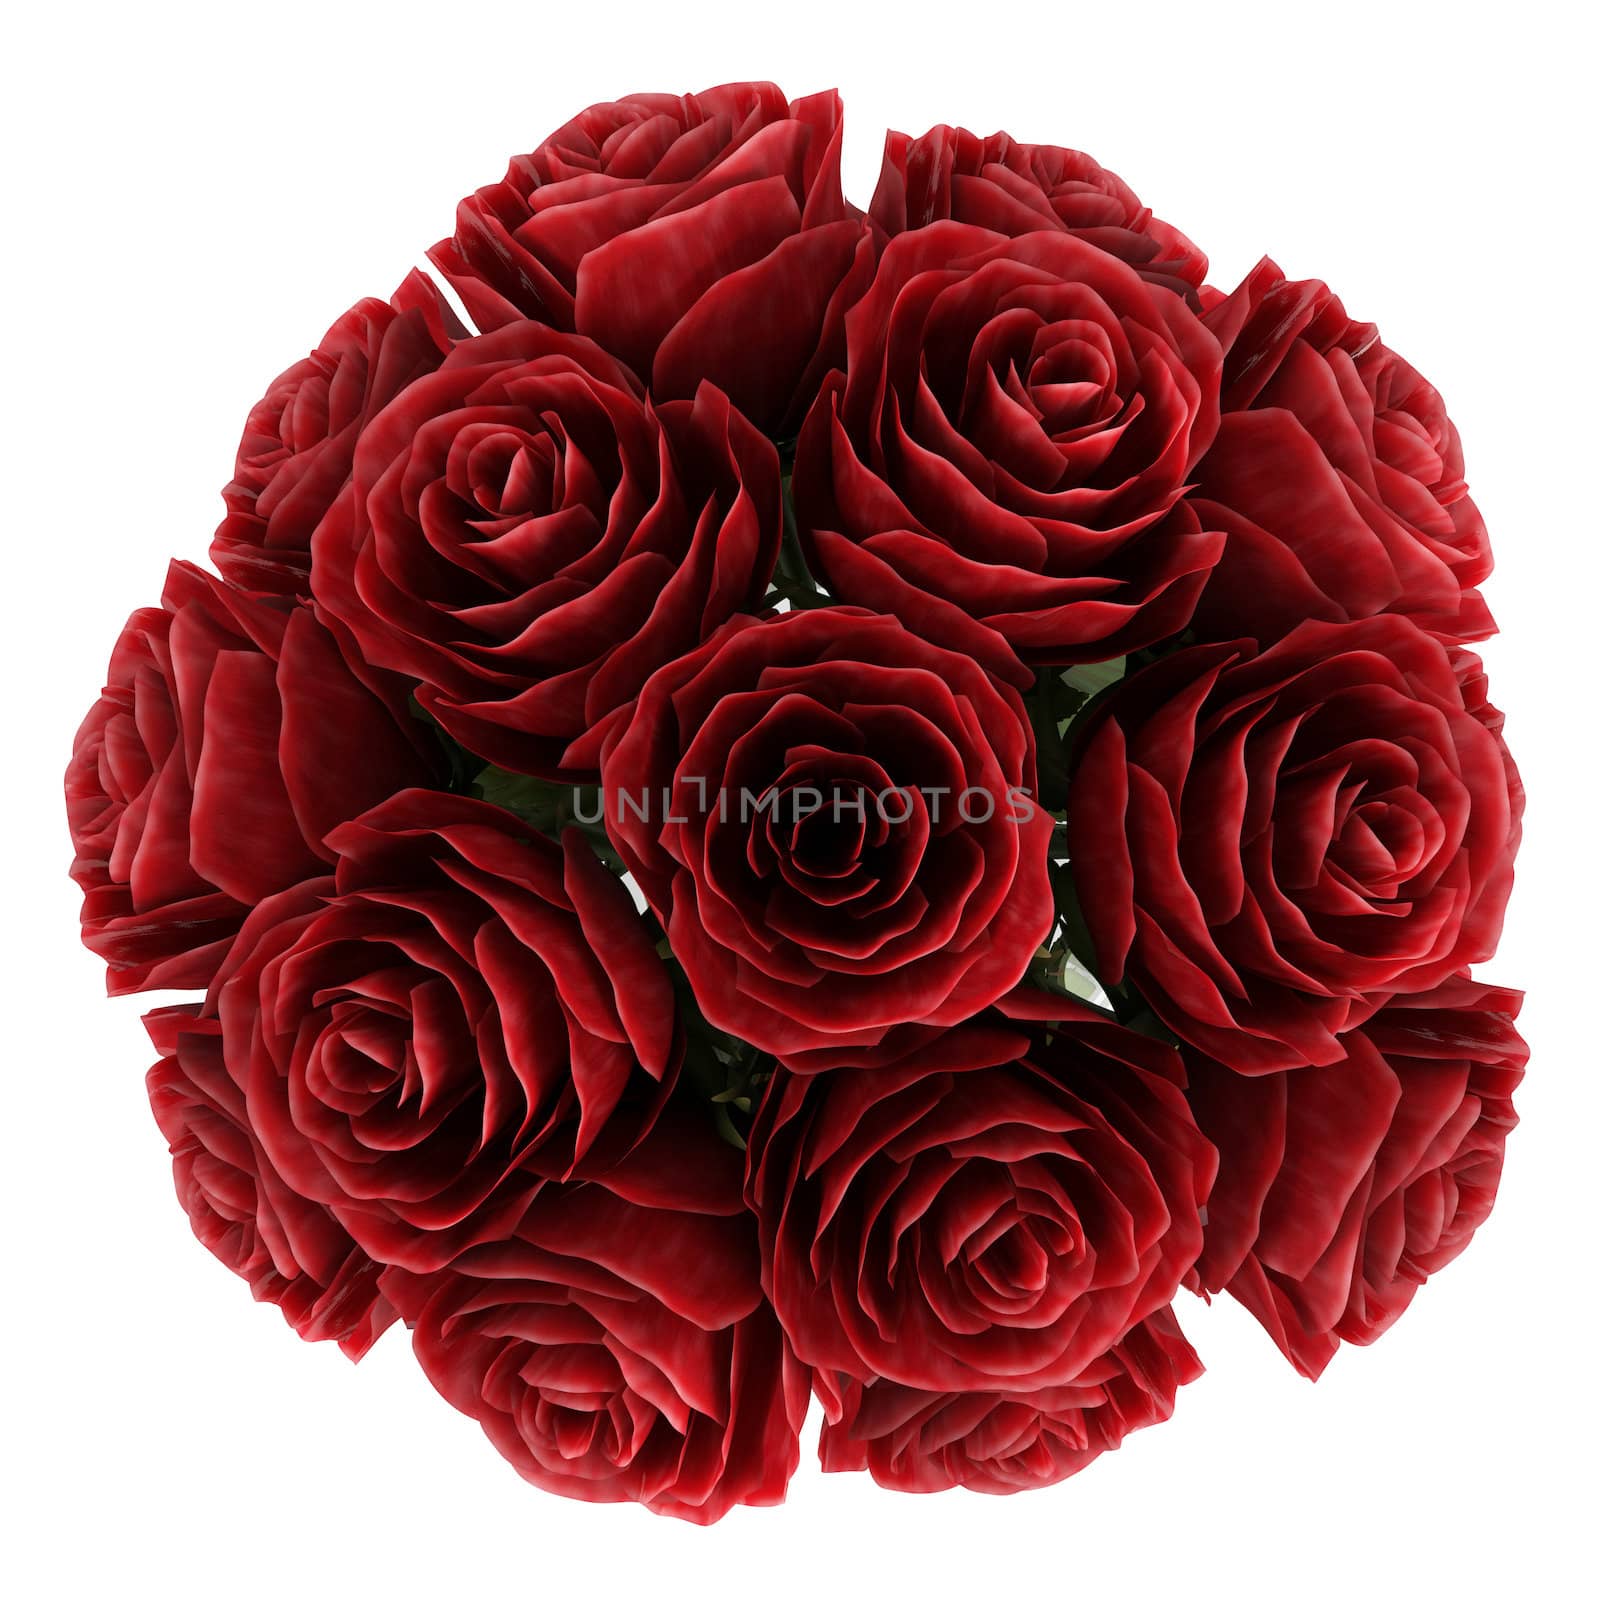 Vase of romantic deep burgundy red roses symbolising love for Valentines day, anniversary or a wedding isolated on white